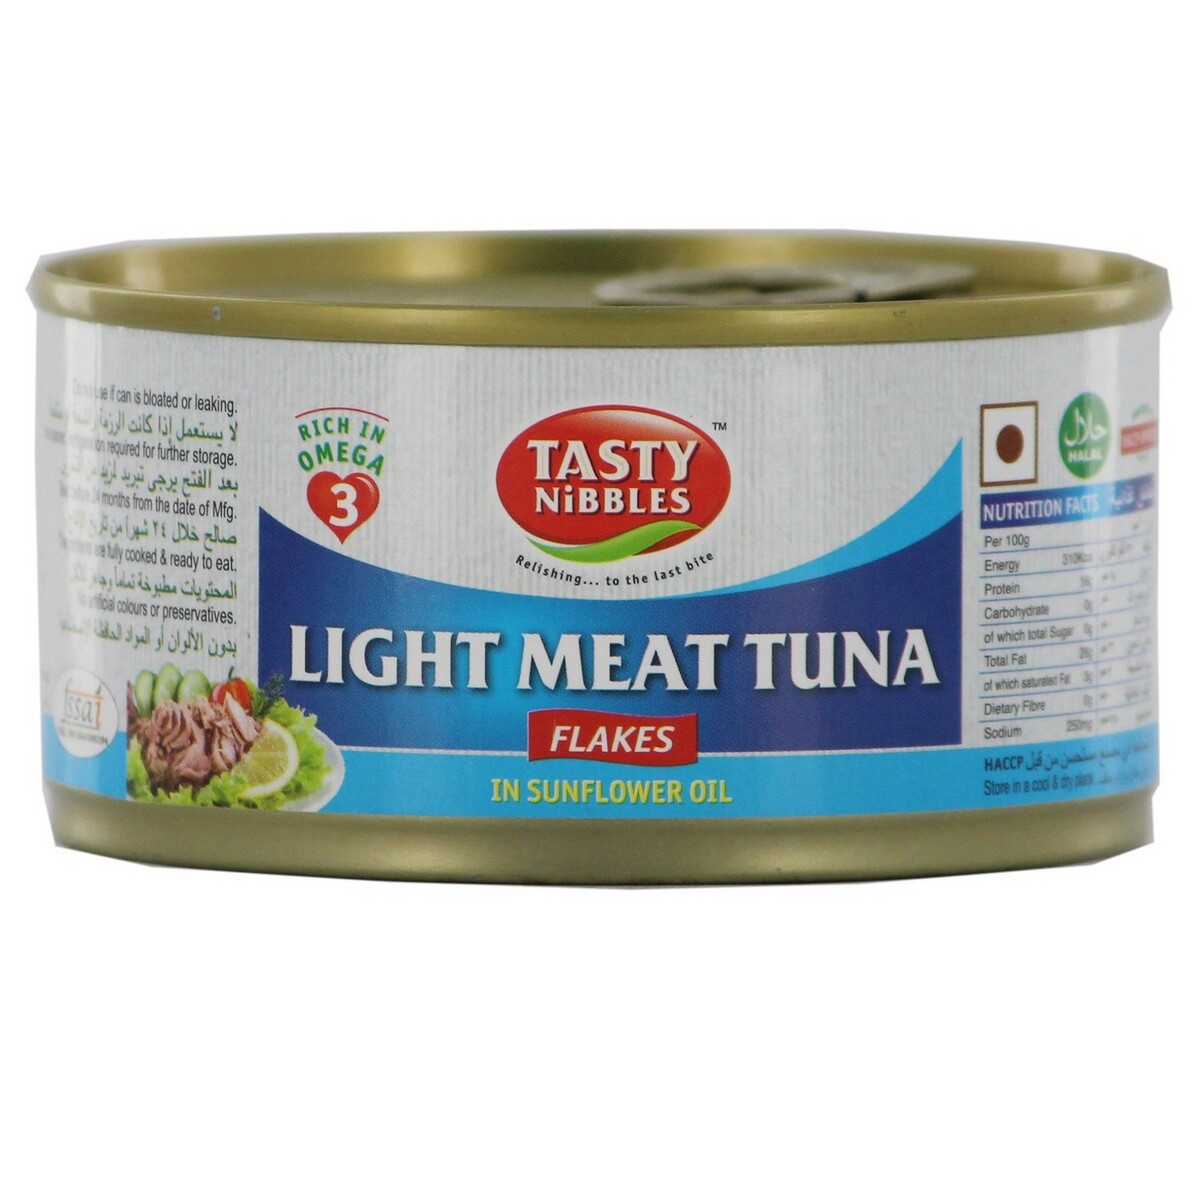 Tasty Nibbles Light Meat Tuna Flakes in Sunflower Oil 185g